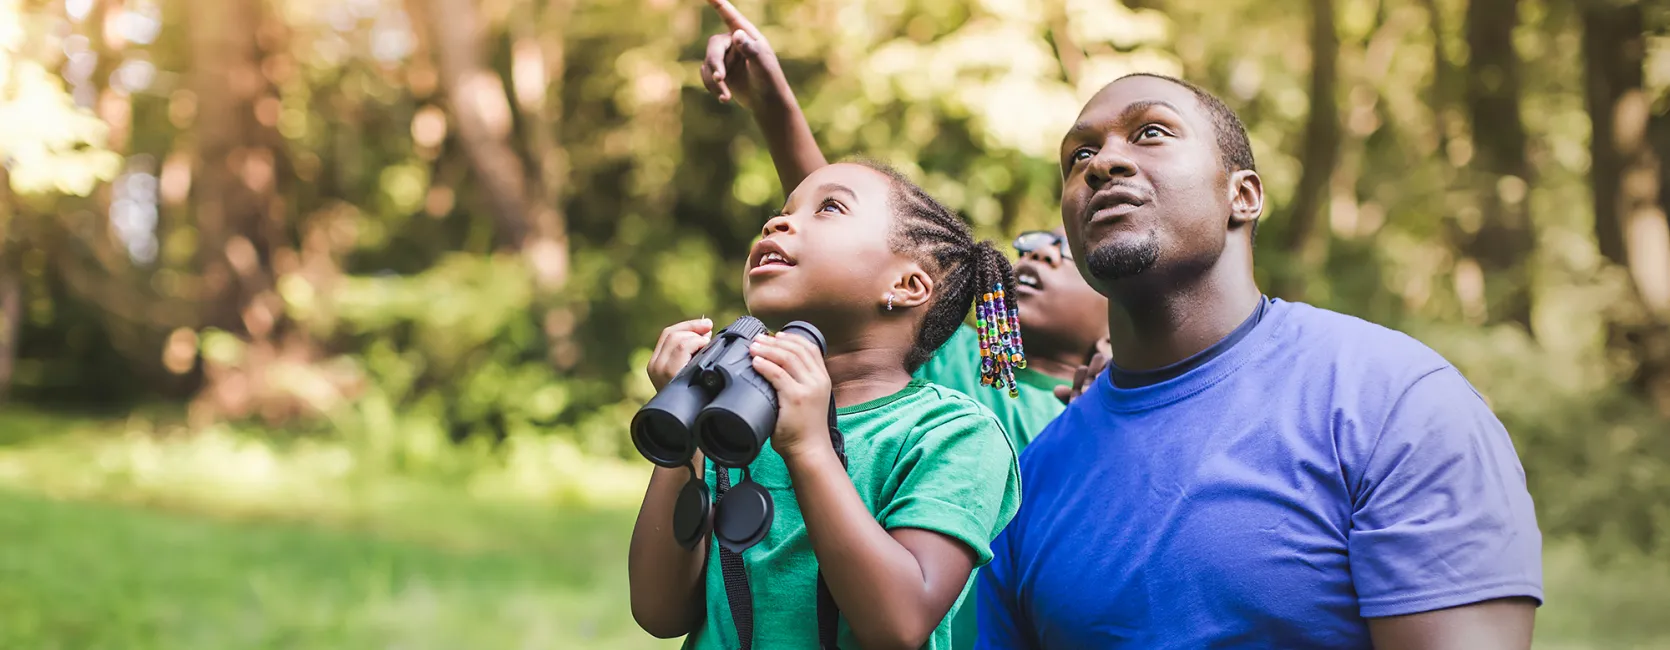 A dark-skinned man and his young daughter and son in front of some trees, looking up as if birdwatching. The girl holds binoculars and the boy is pointing diagonally up.